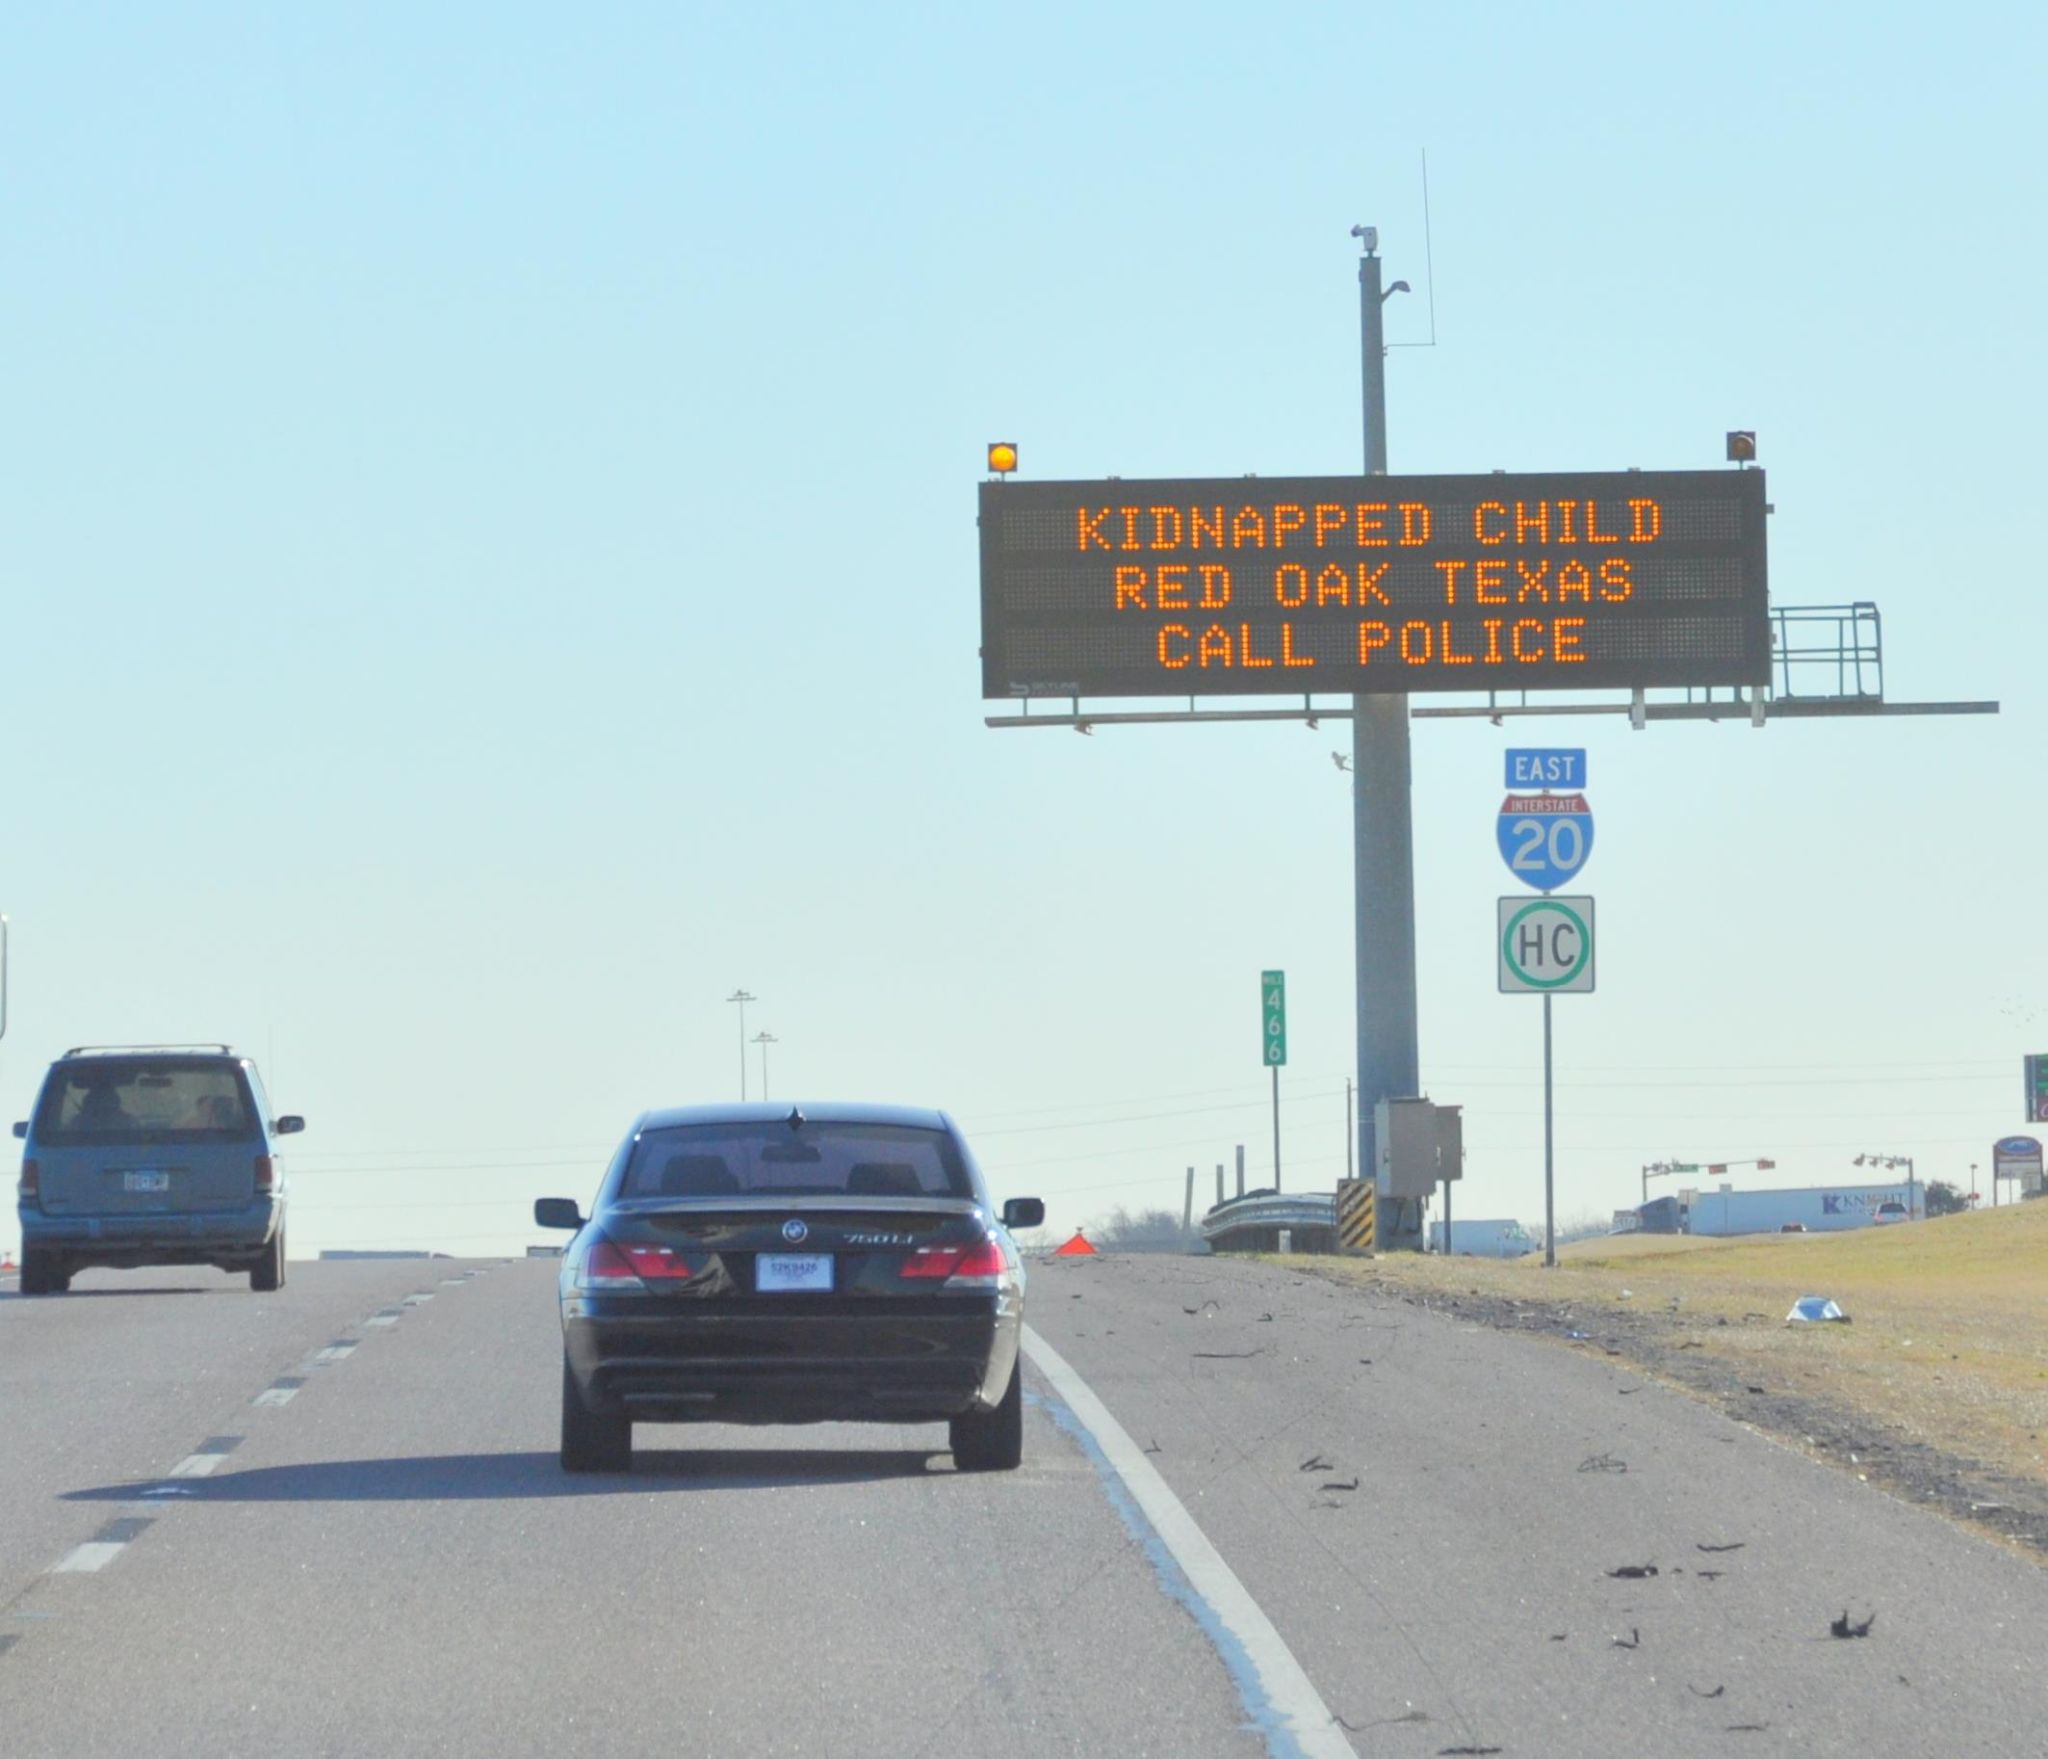 Kidnapped Child Sign, I-45 Between Dallas and Houston - 2014-01-14